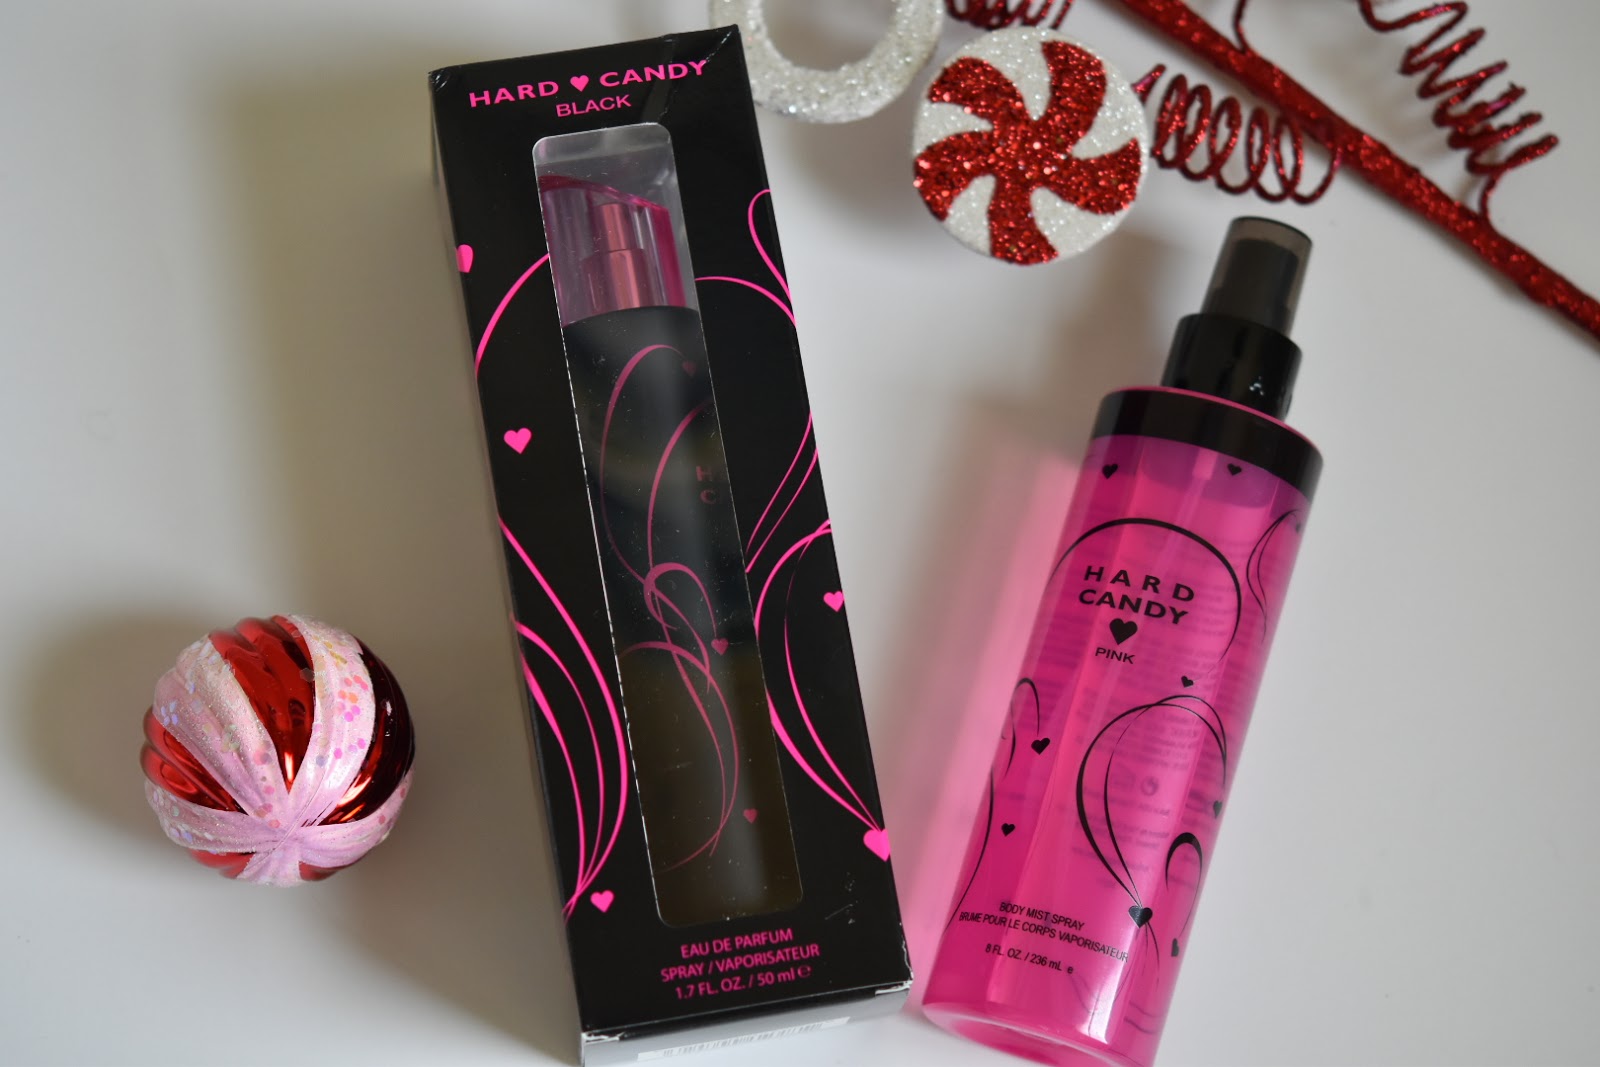 Last Minute Gift Ideas: Hard Candy Pink and Black Eau de Parfum and Body Mists  via www.productreviewmom.com